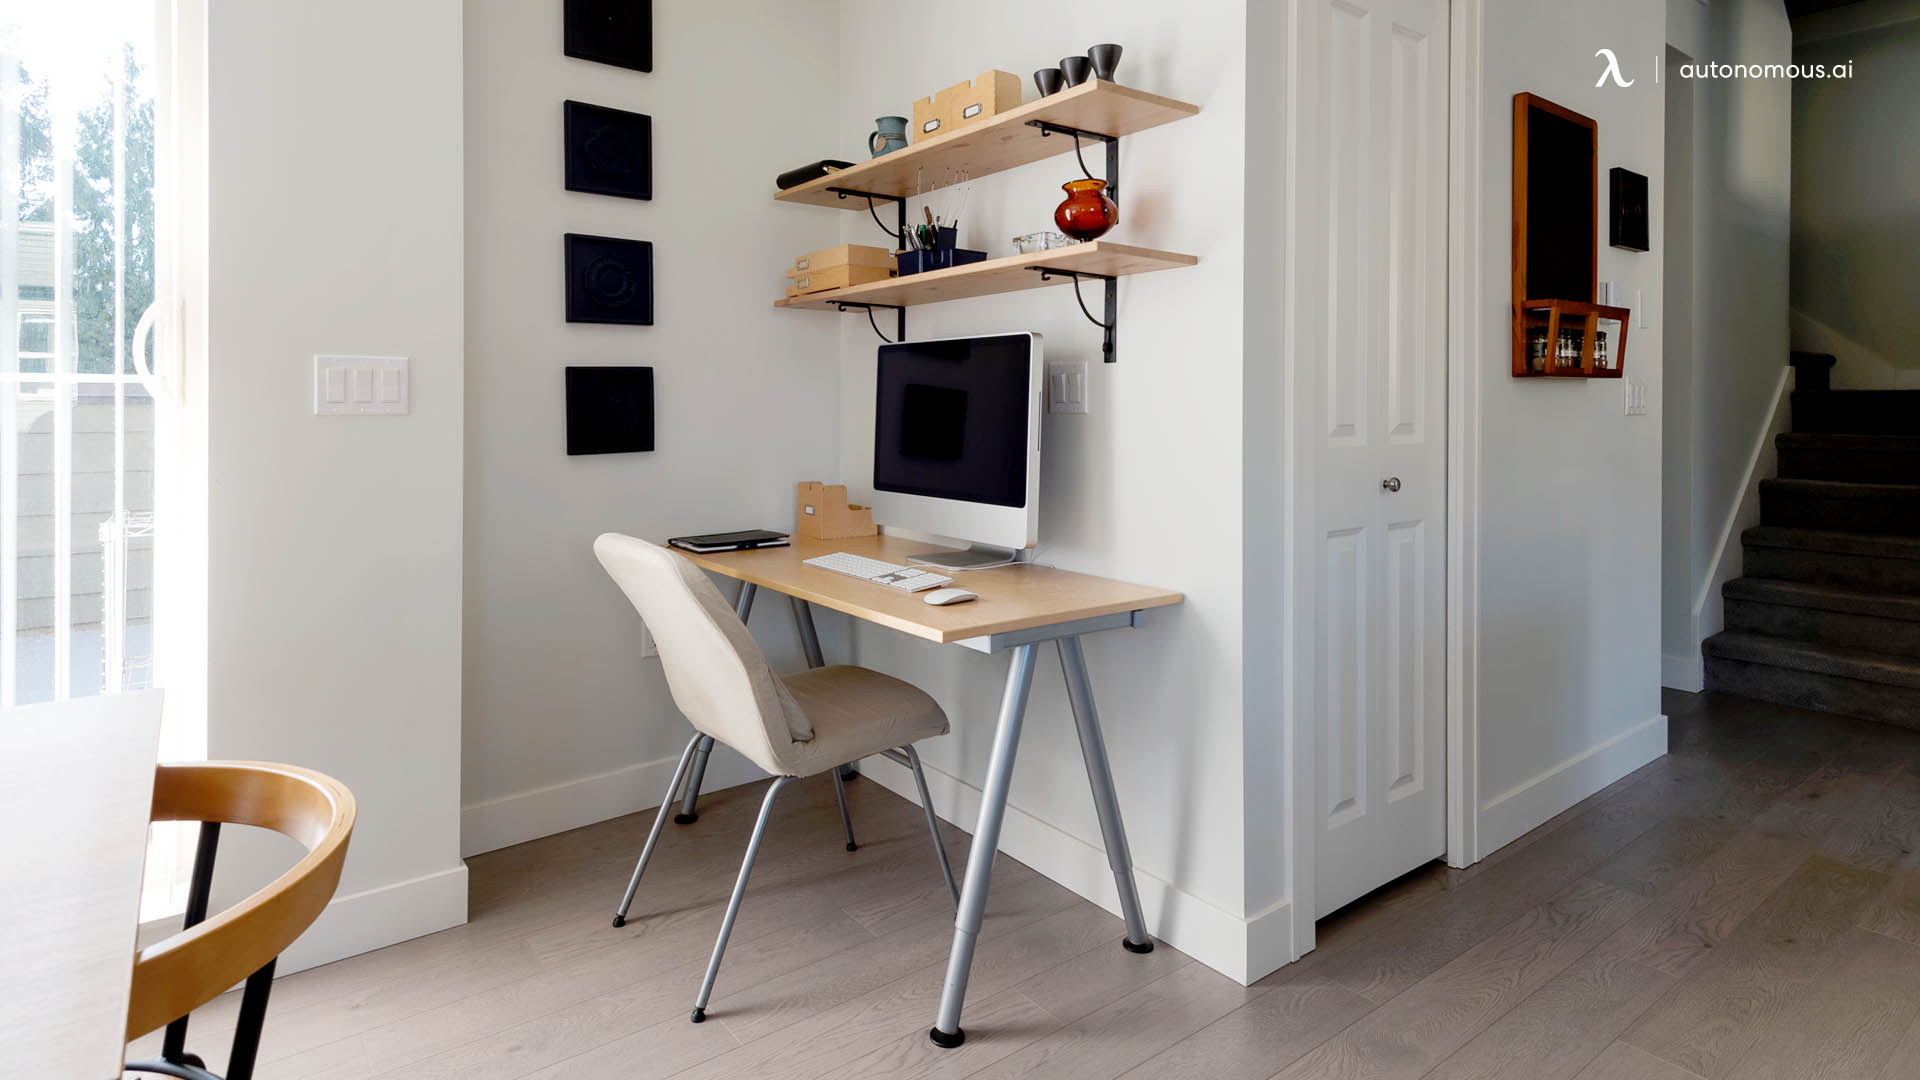 Small-Space Hacks With 10 Small Home Office Ideas in UK